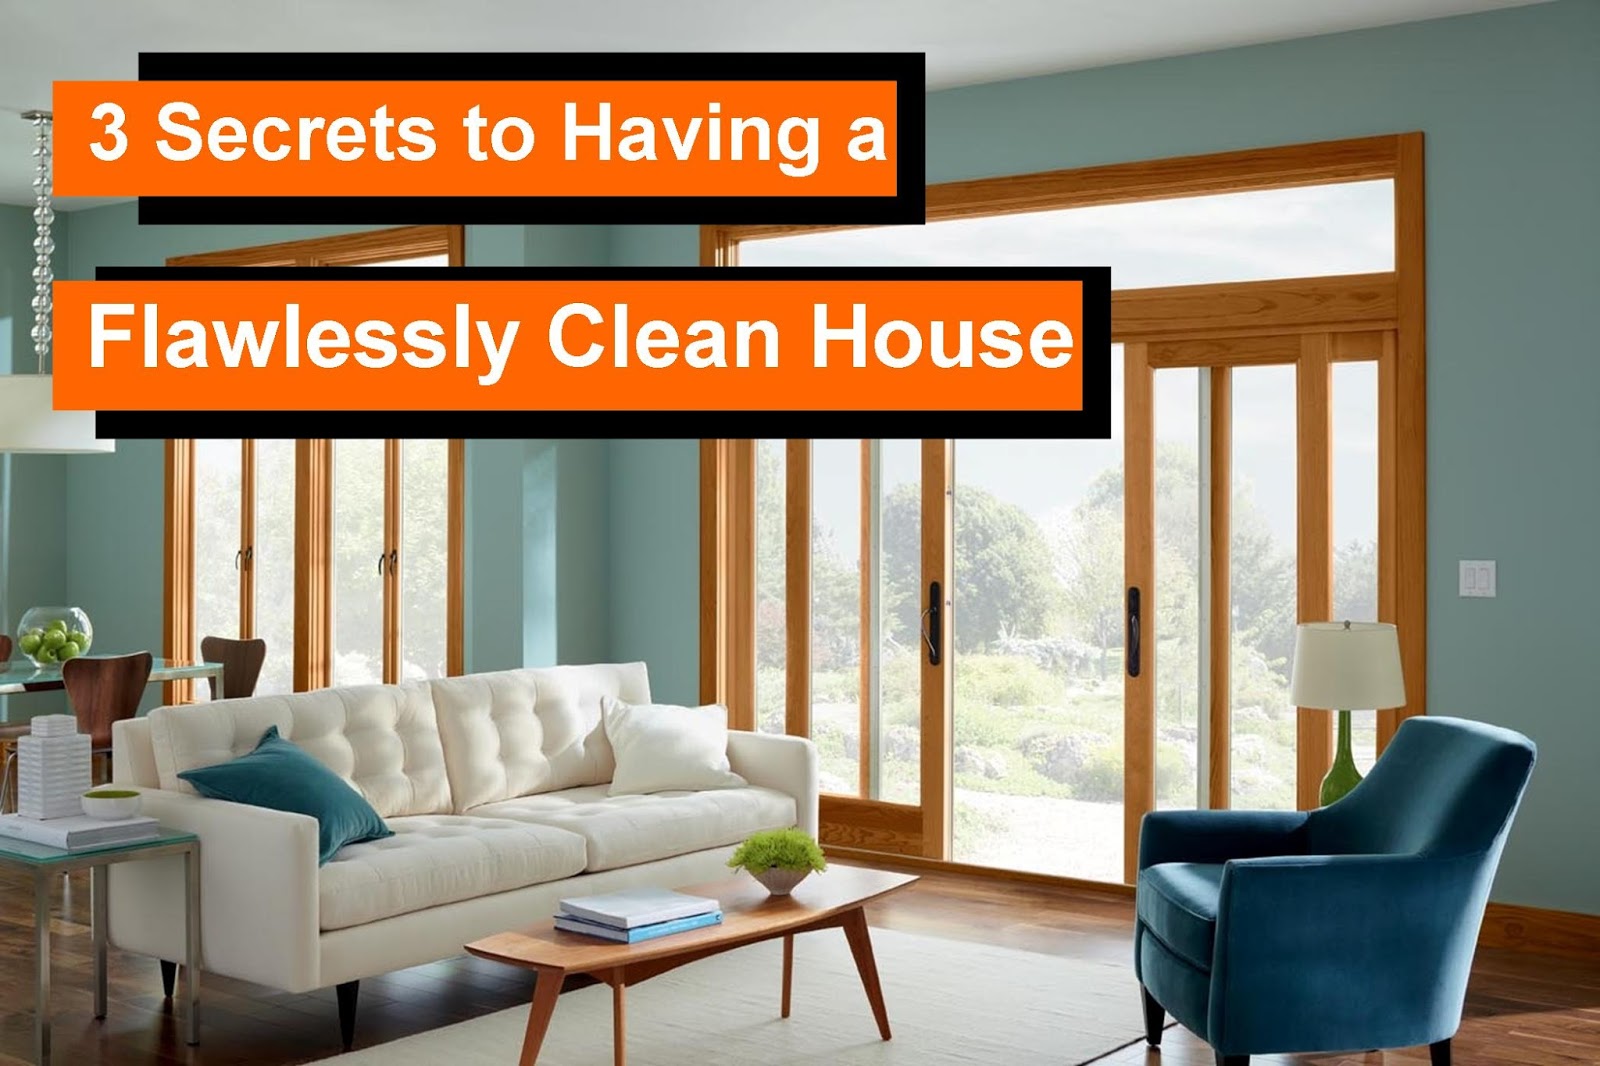 You know the type. Their homes are always impeccably clean. What do they know that you don't? We share three secrets of the impeccably clean house.